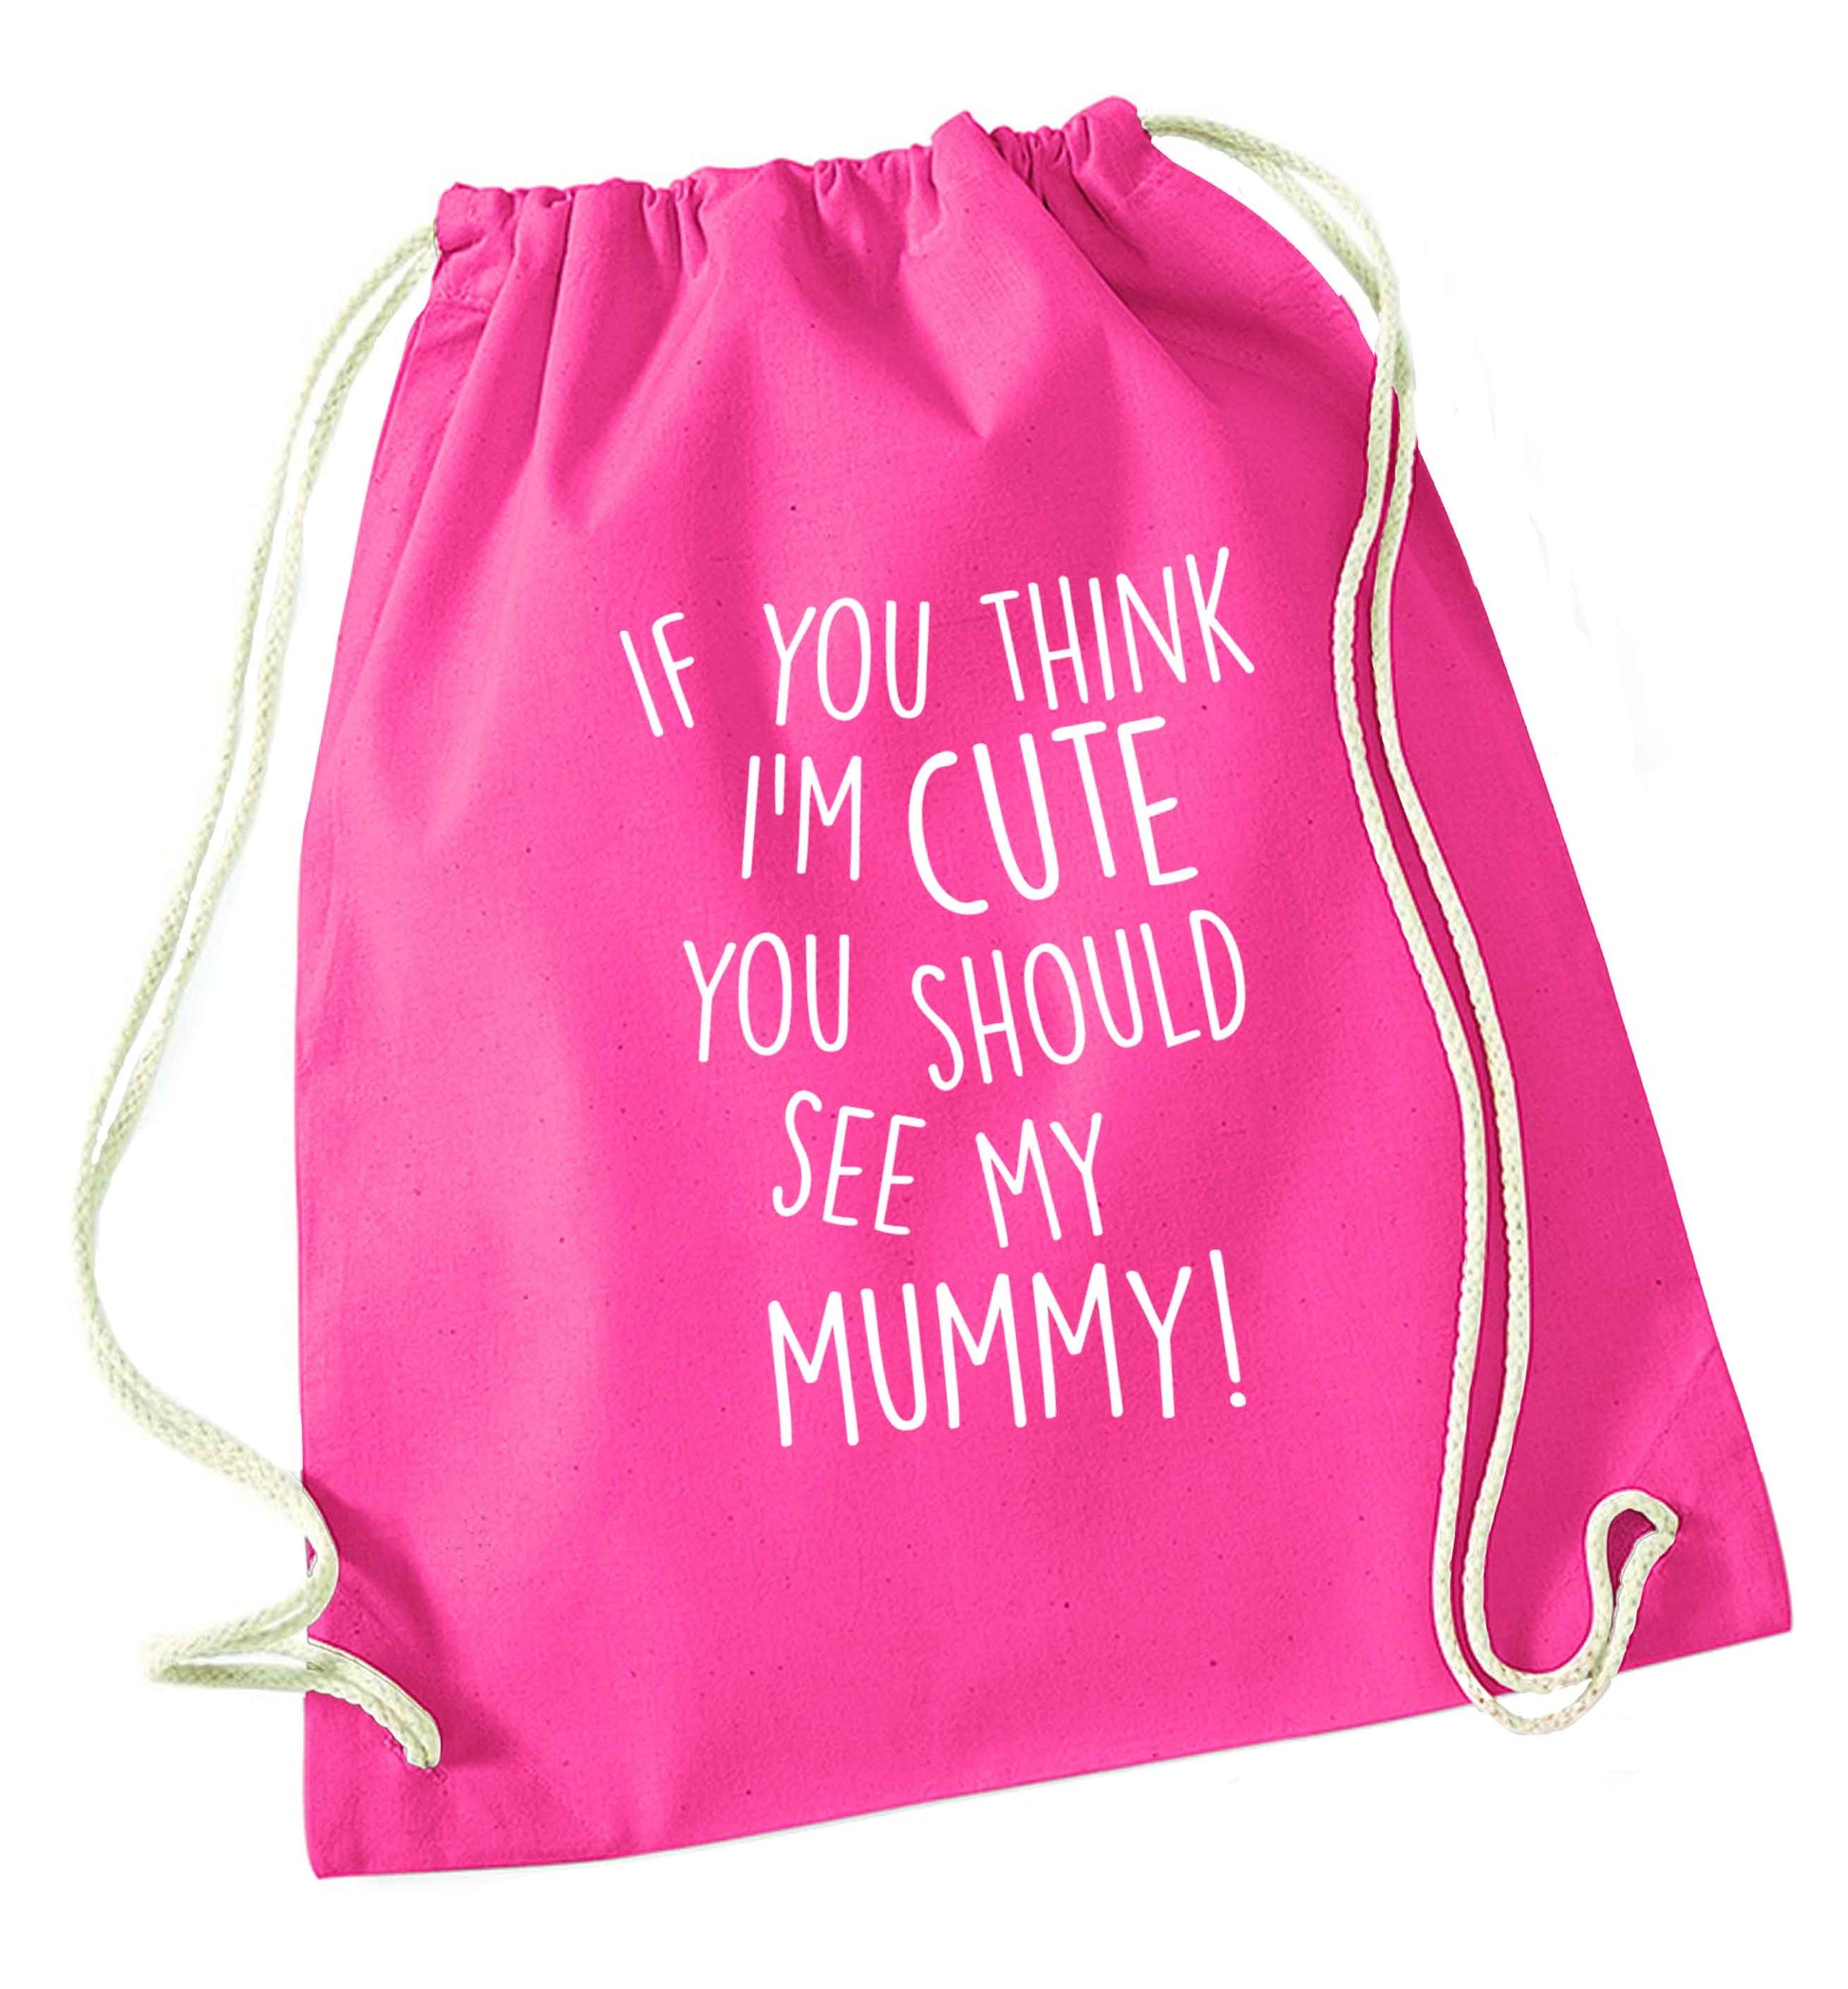 If you think I'm cute you should see my mummy pink drawstring bag